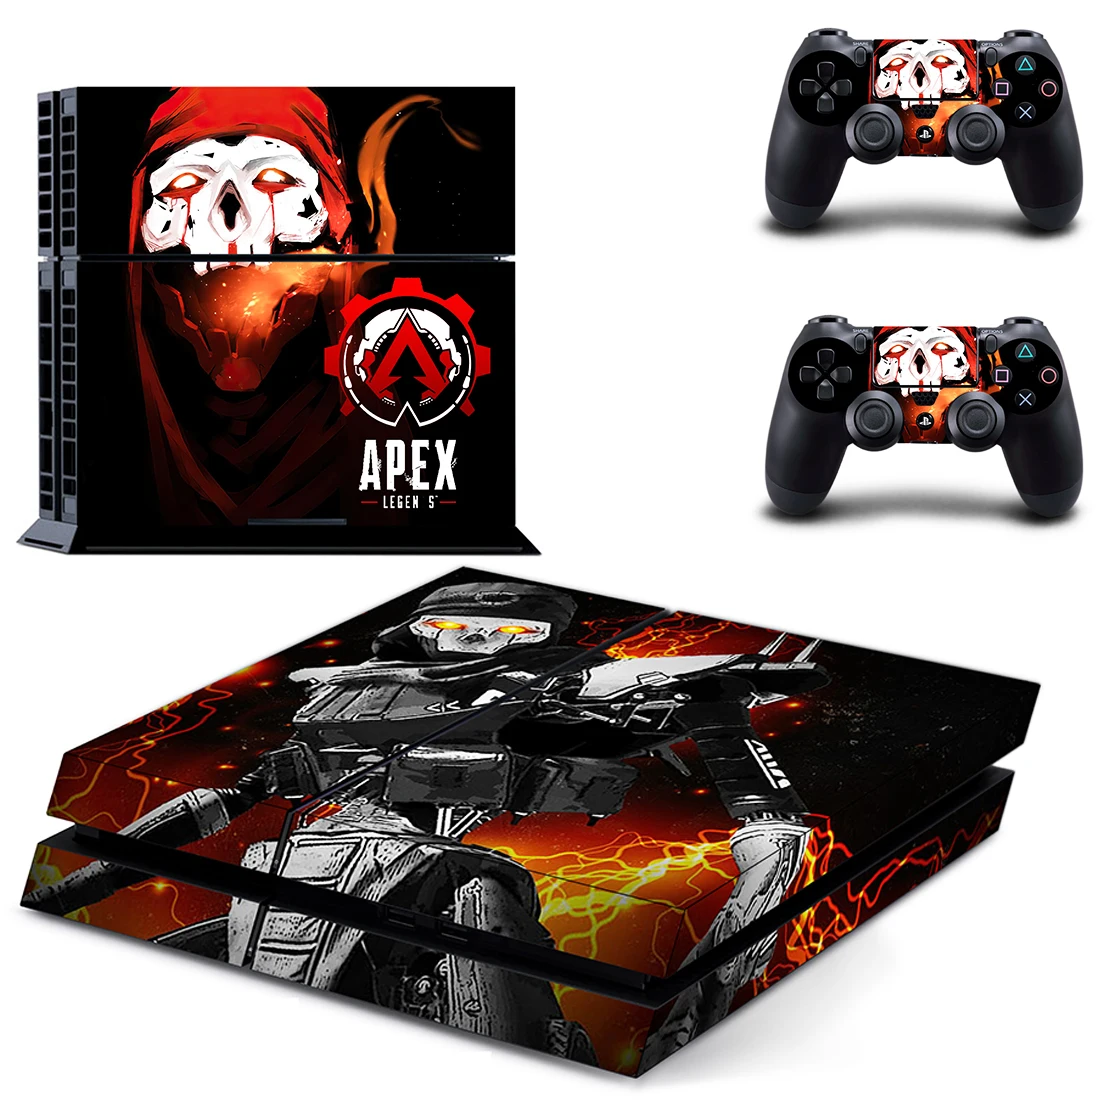 

APEX Legends PS4 Stickers Decals Cover For PlayStation 4 PS4 Console and Controller Skins Vinyl